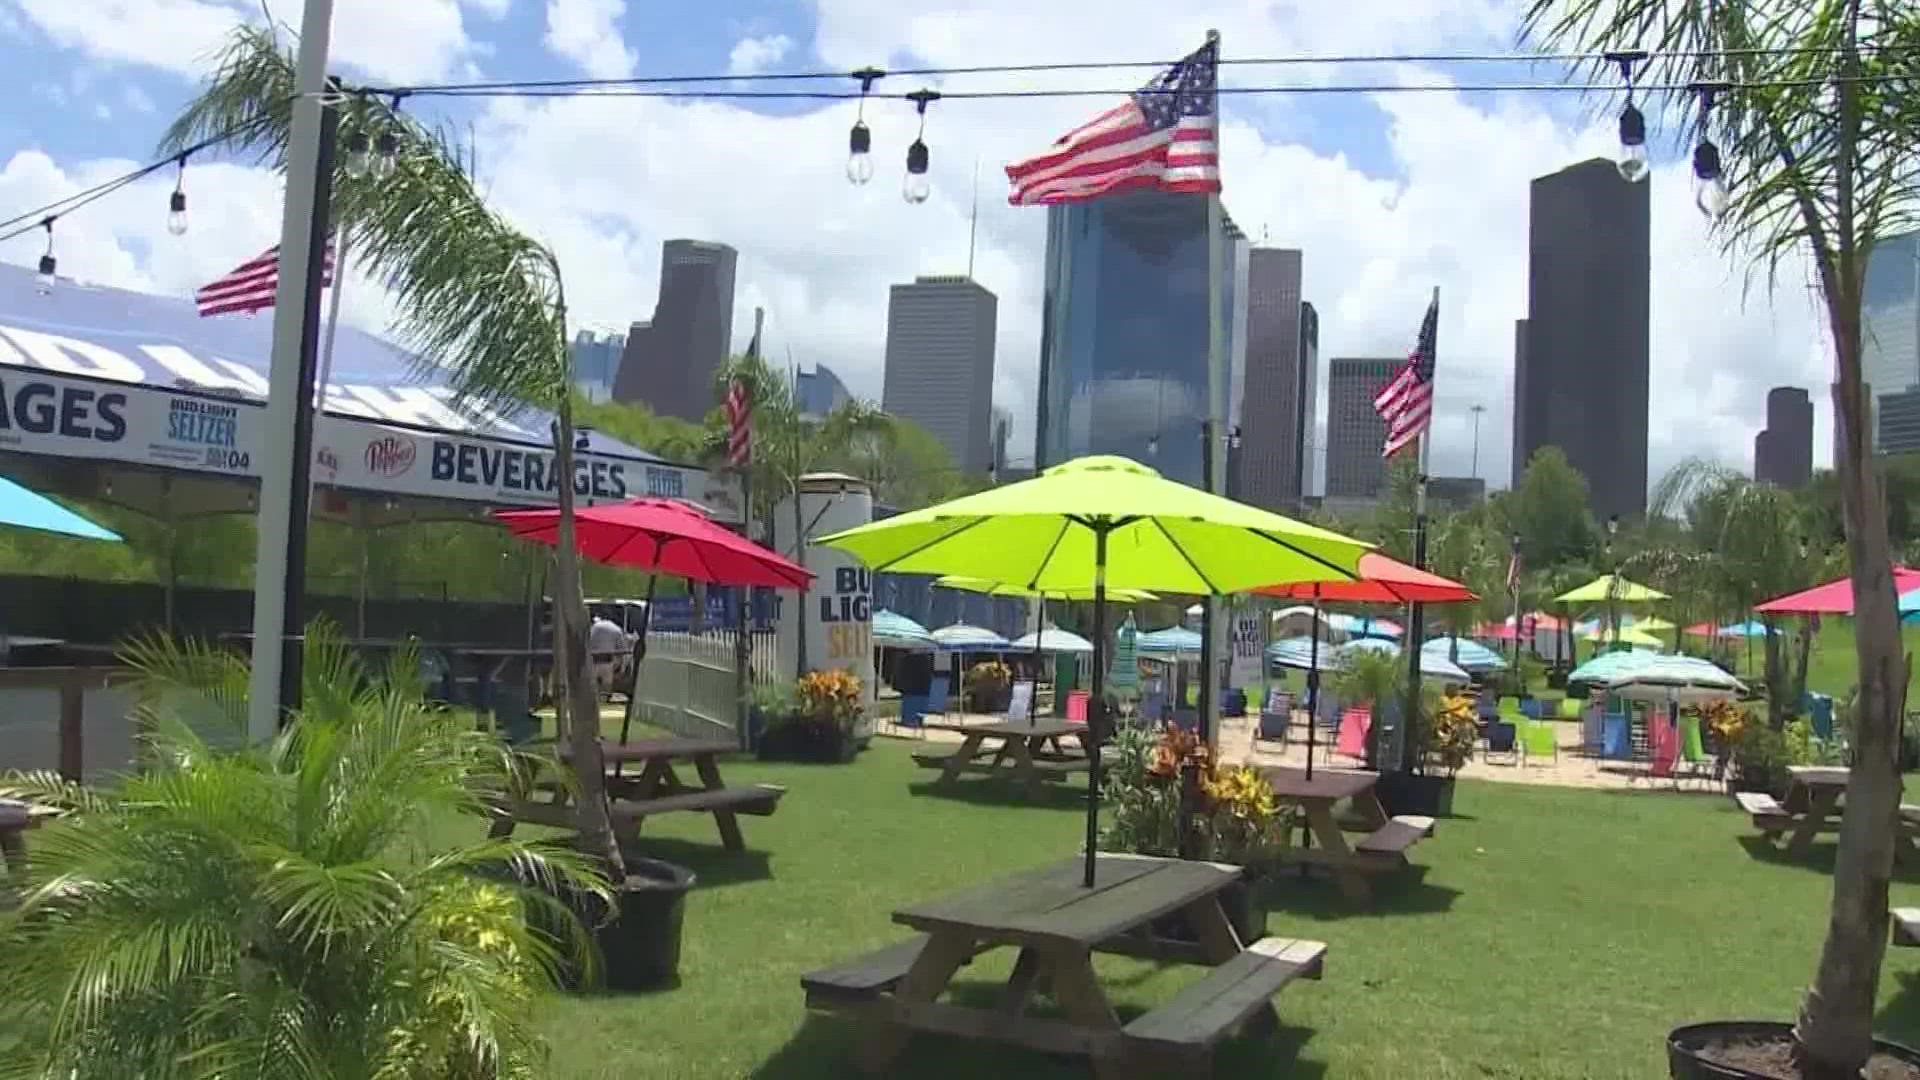 Houston it's ready to host its Fourth of July celebration and its keeping an eye on safety in light of the mass shooting at the Illinois July 4 parade.